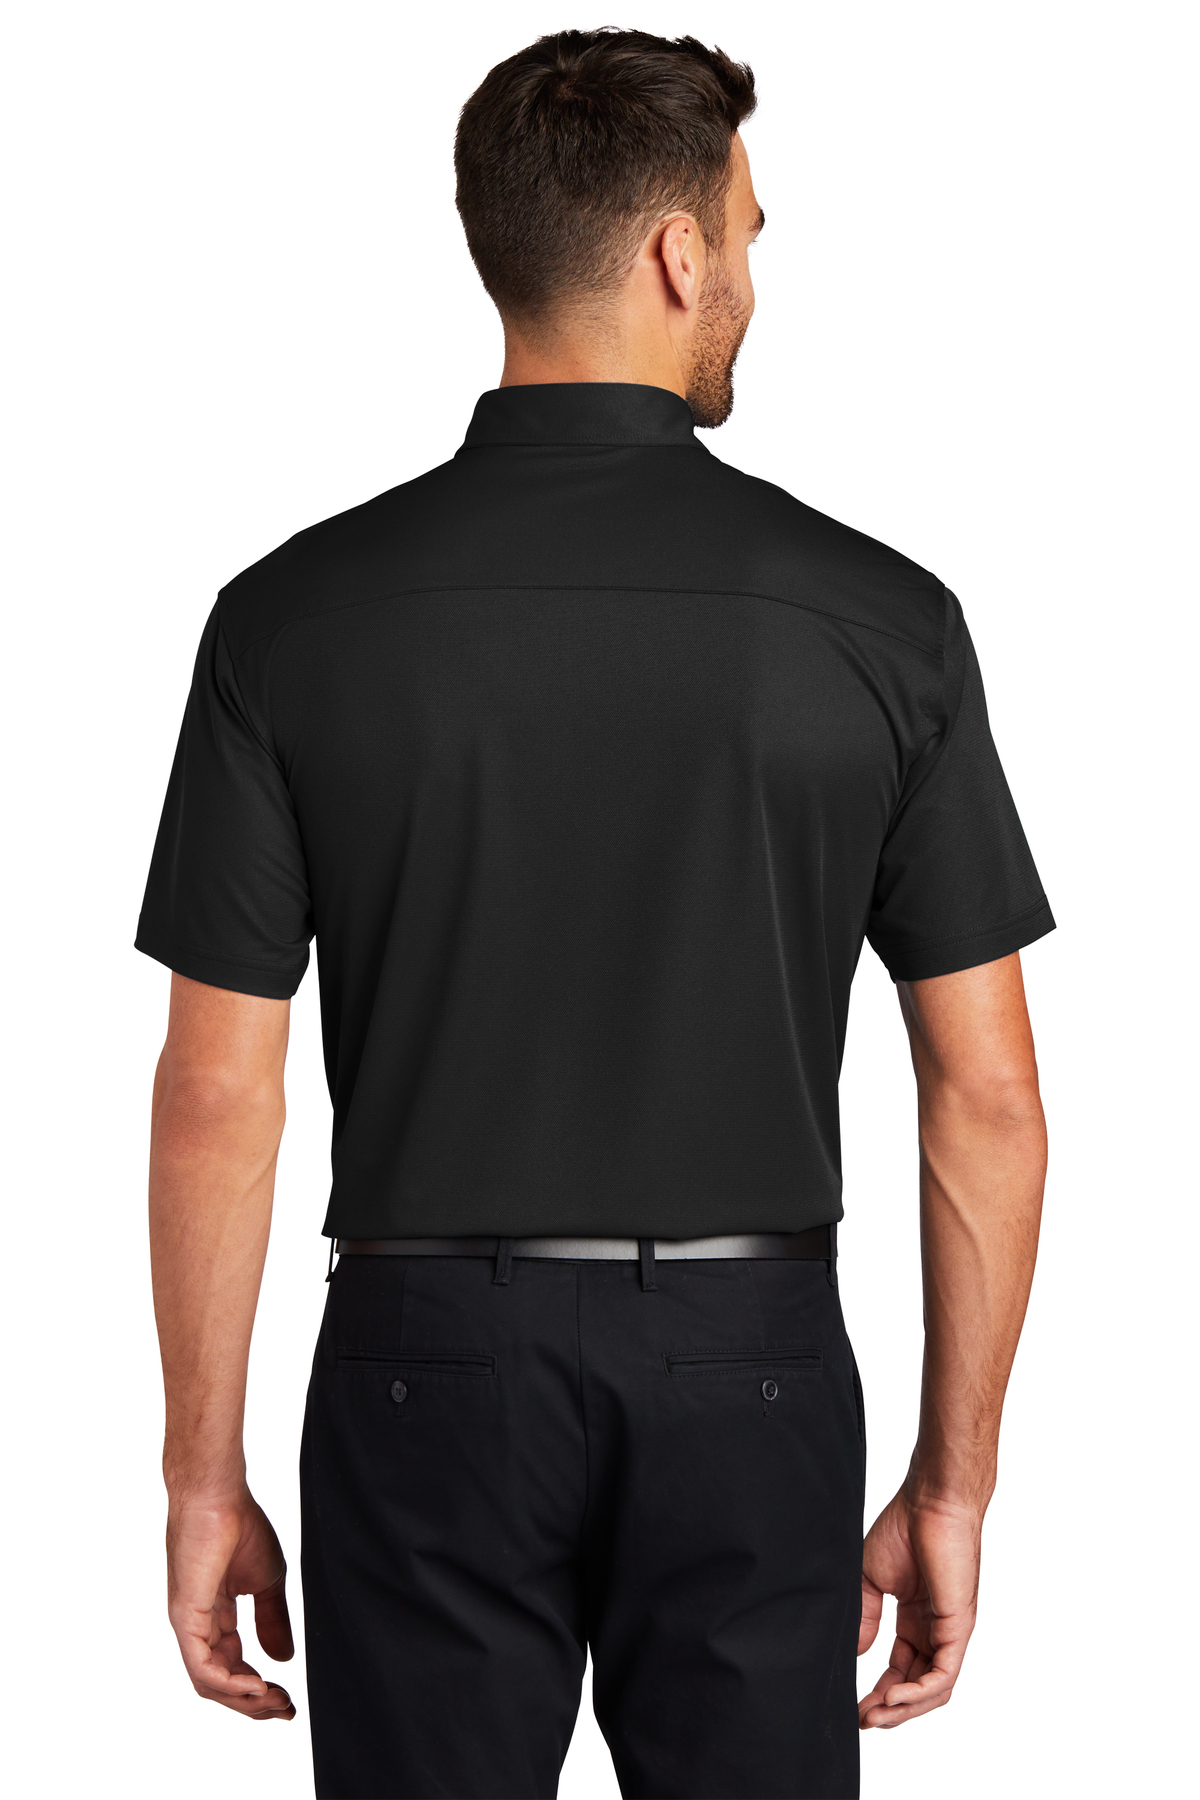 Port Authority ® Dimension Polo | Product | Company Casuals